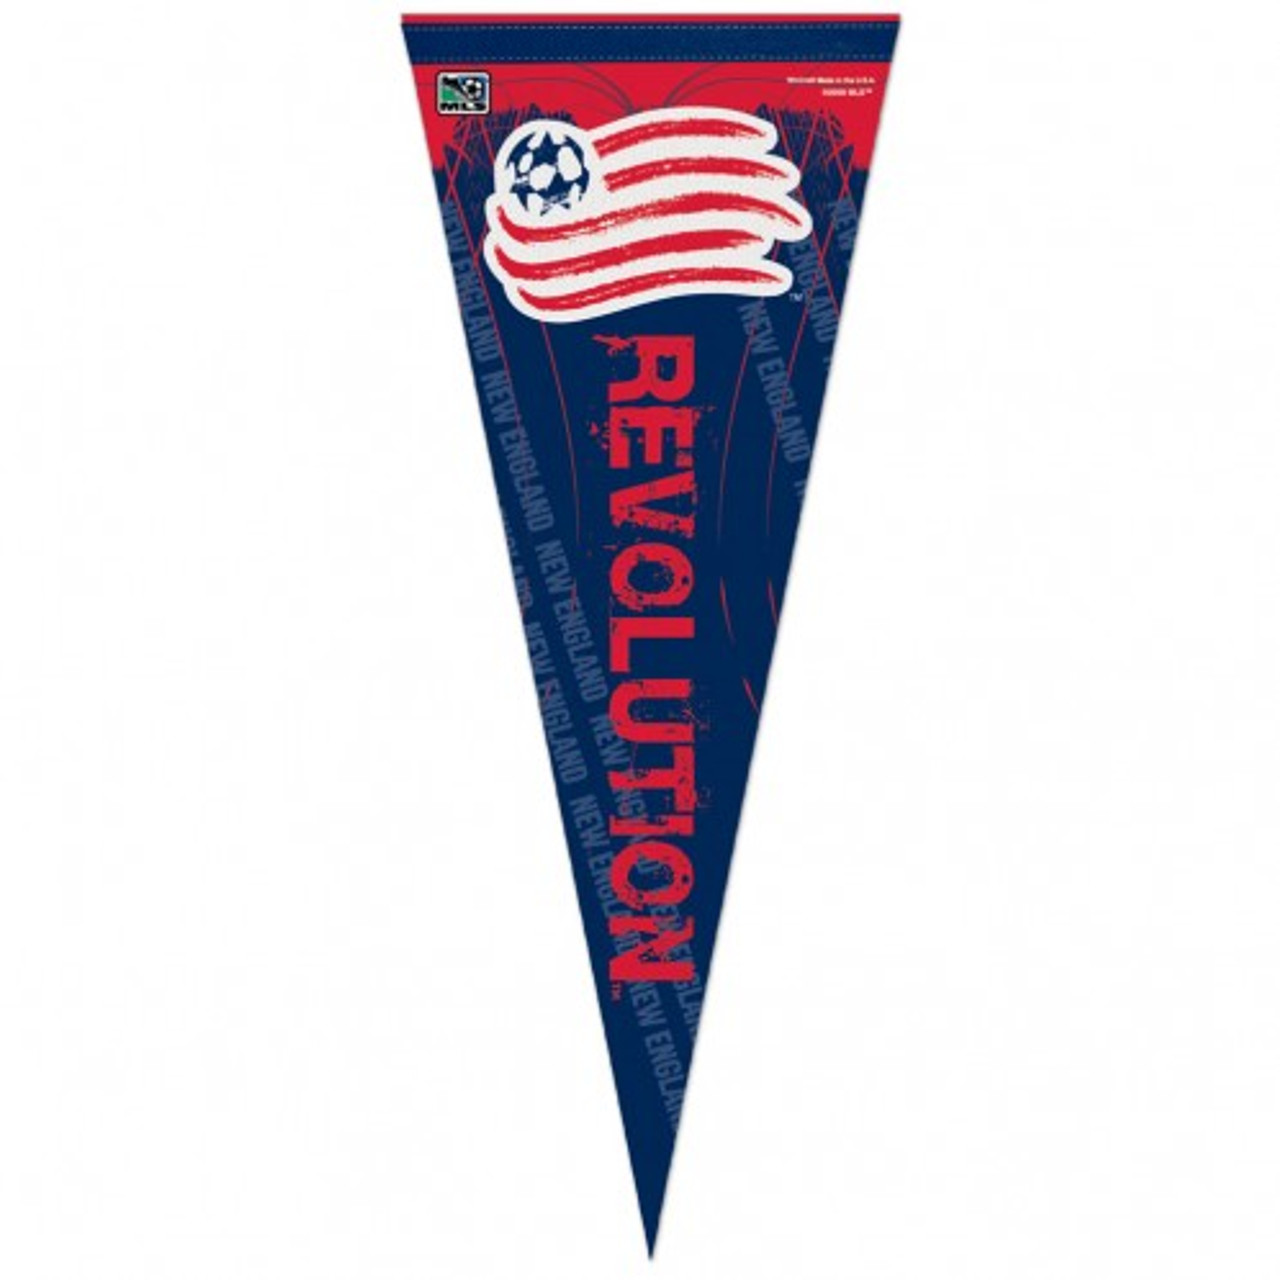 Wincraft New England Revolution Pennant 12x30 Premium Style - Special Order